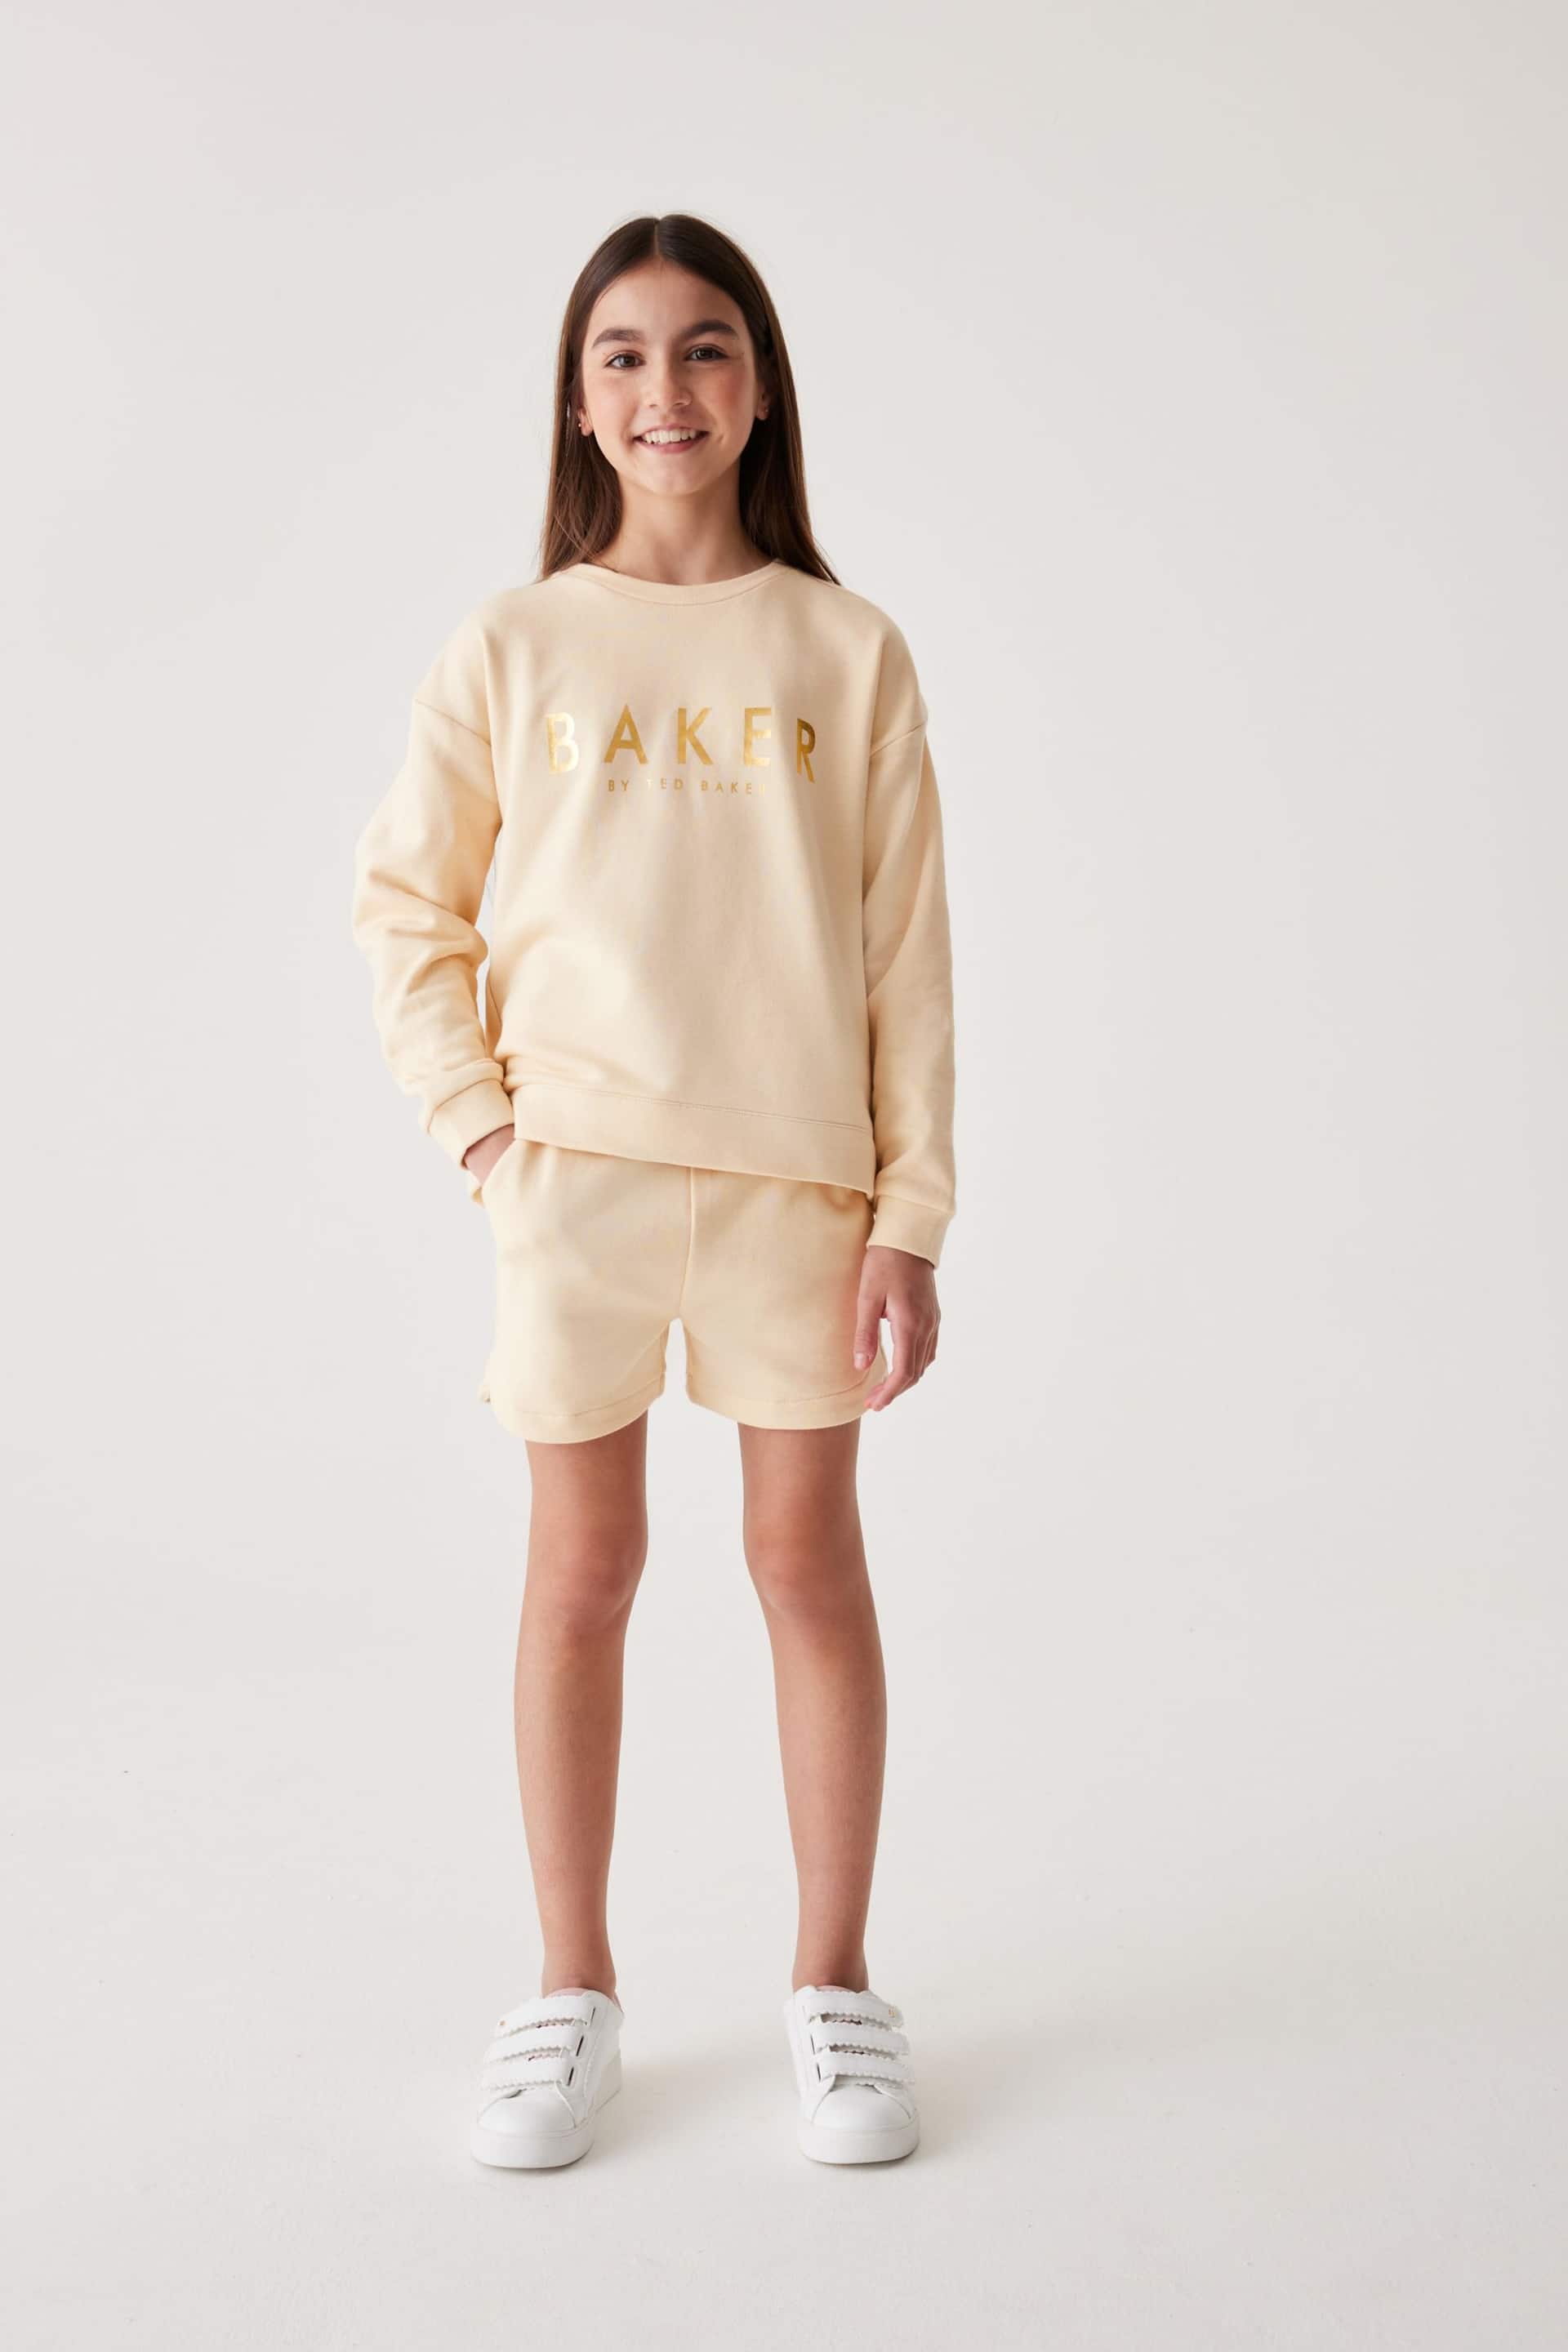 Baker by Ted Baker Stone Split Back Sweater And Shorts Set - Image 3 of 10